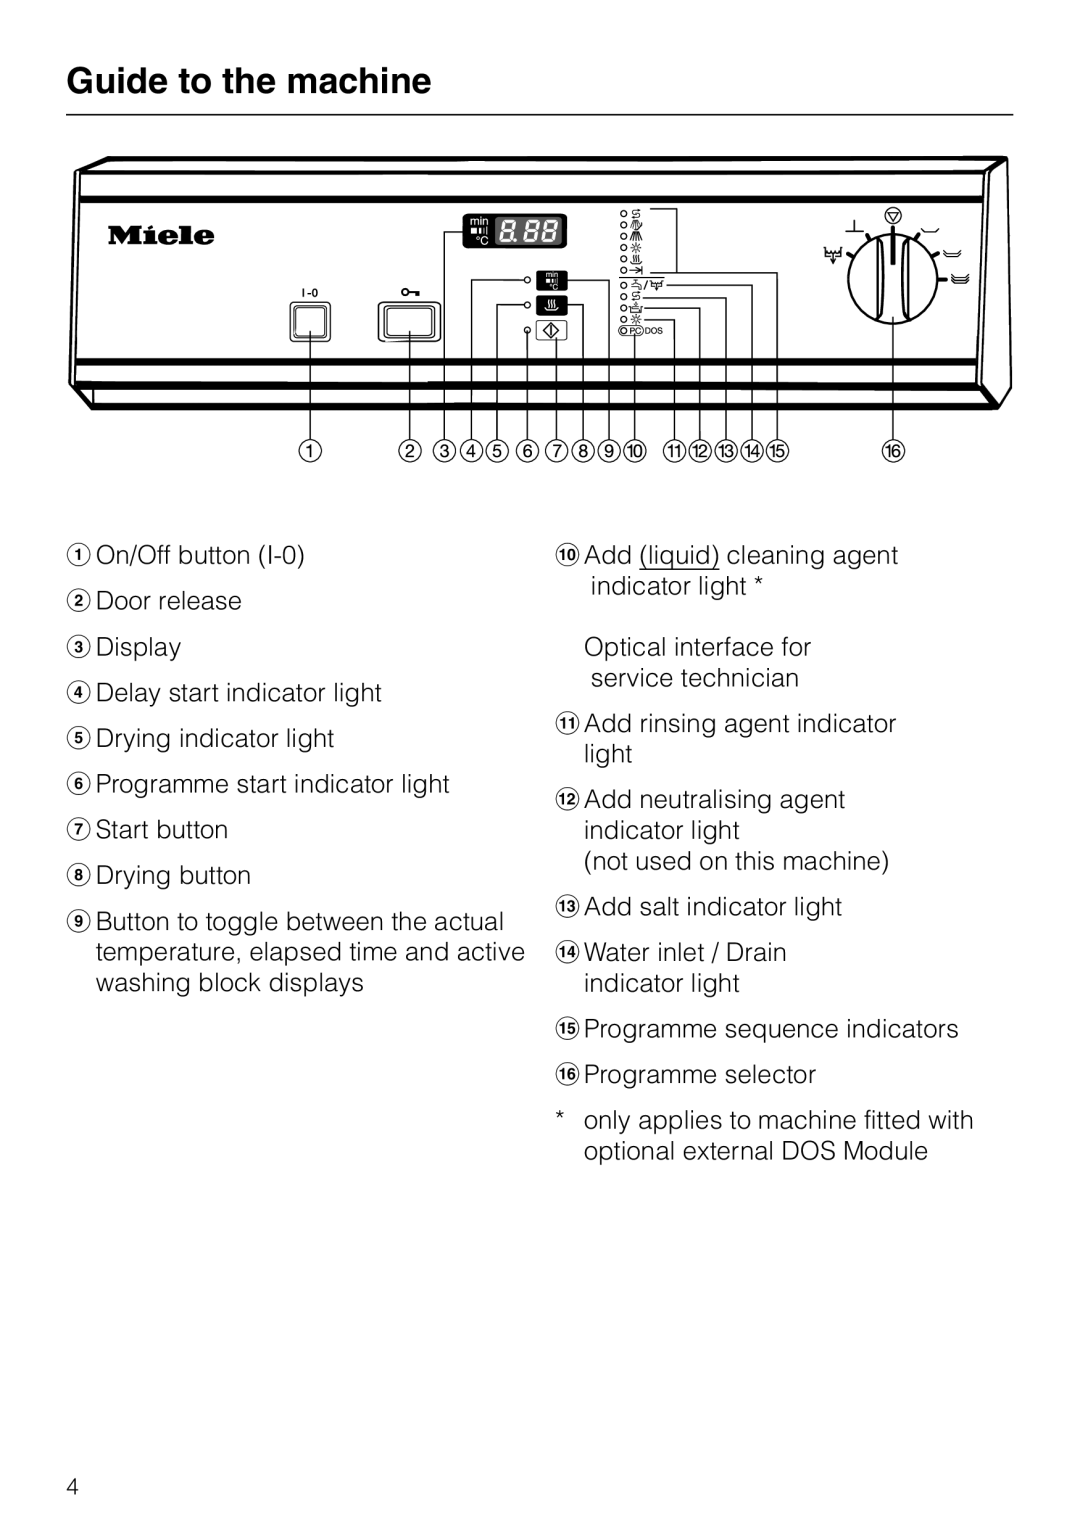 Miele G 7860 operating instructions Guide to the machine 